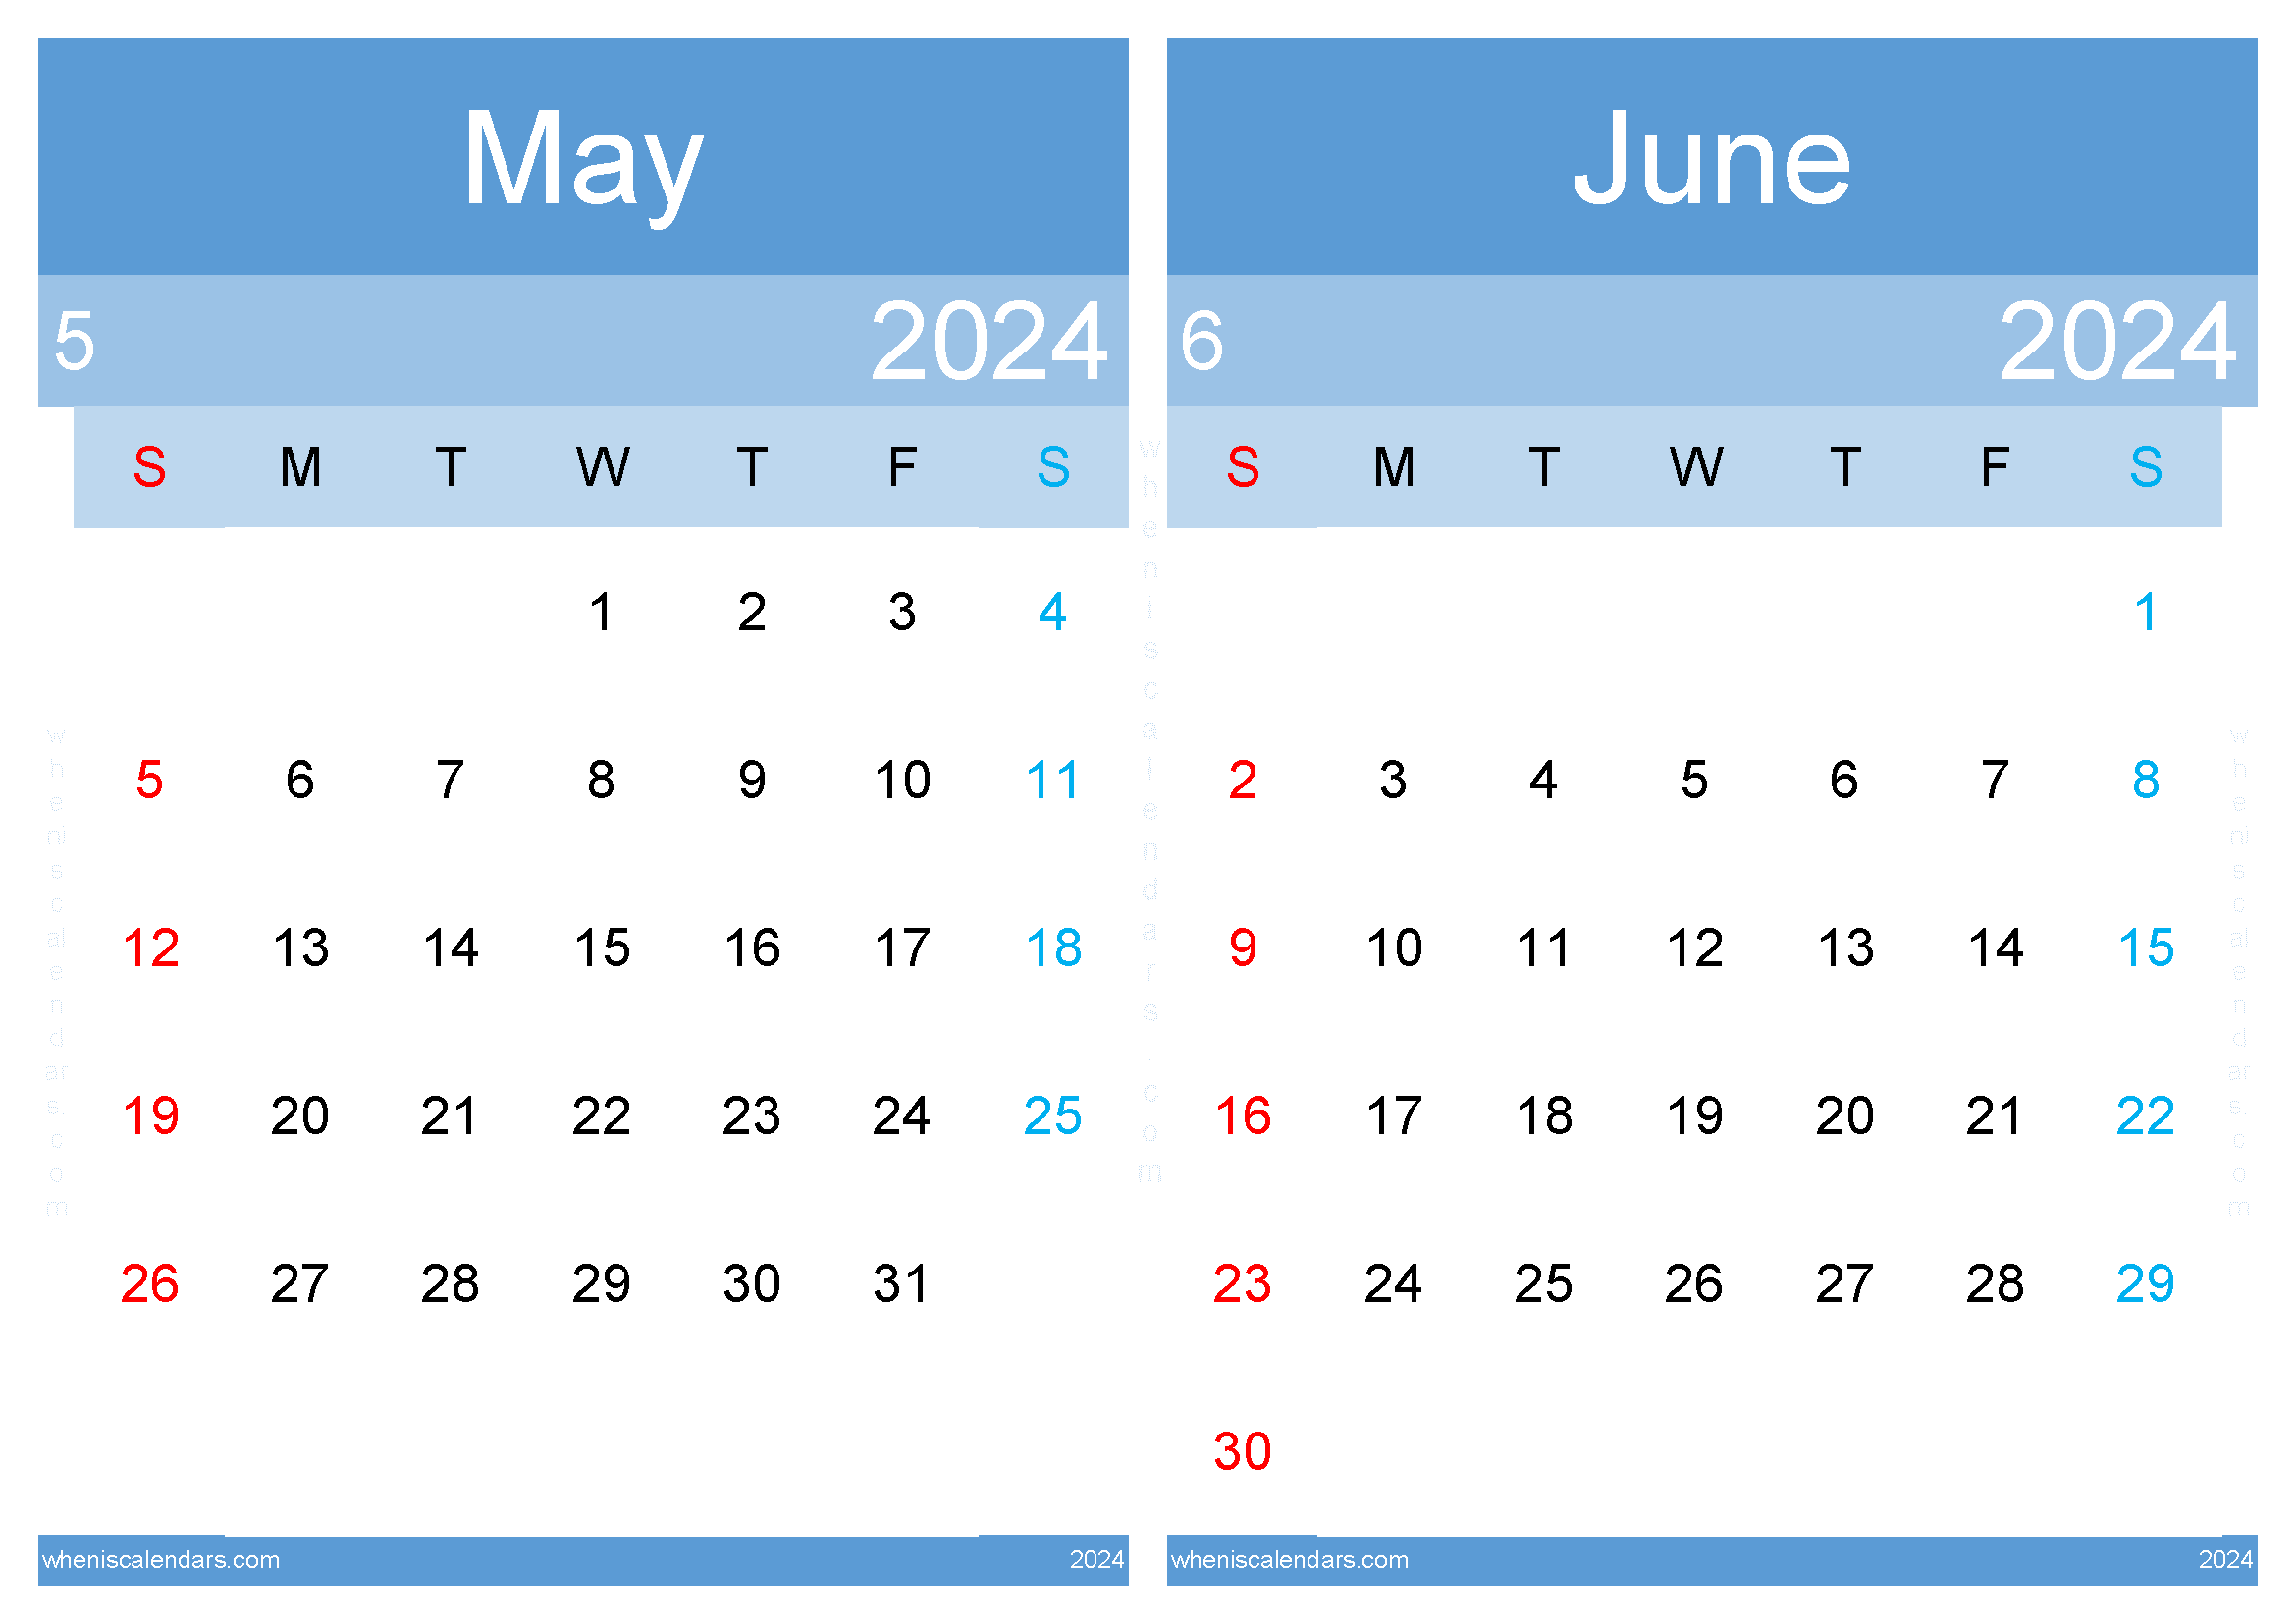 Download printable calendar for May and June 2024 A4 MJ242040